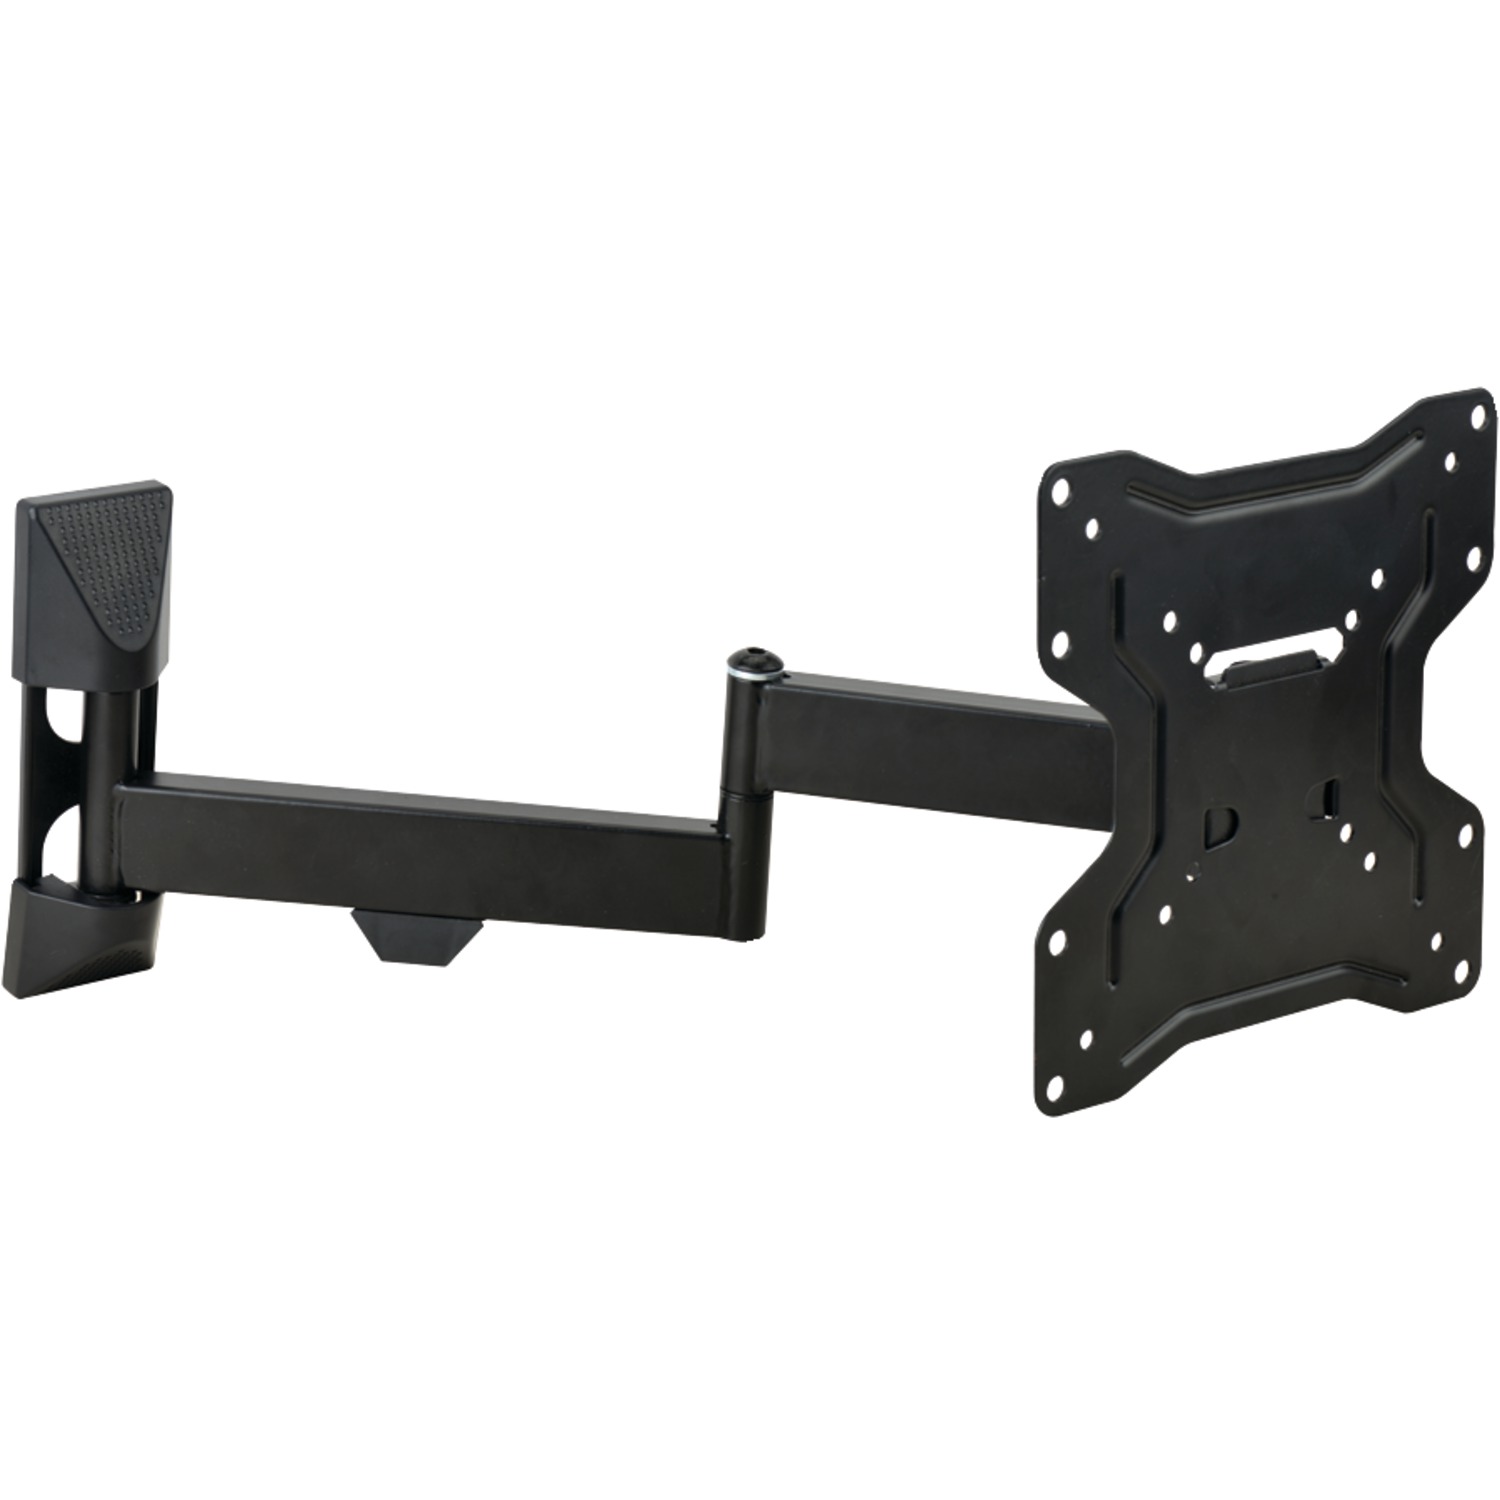 Supersonic 818549028535 19 in. Class HD 720P LED TV & Stanley TMX-102FM Full-Motion Mount - image 2 of 4